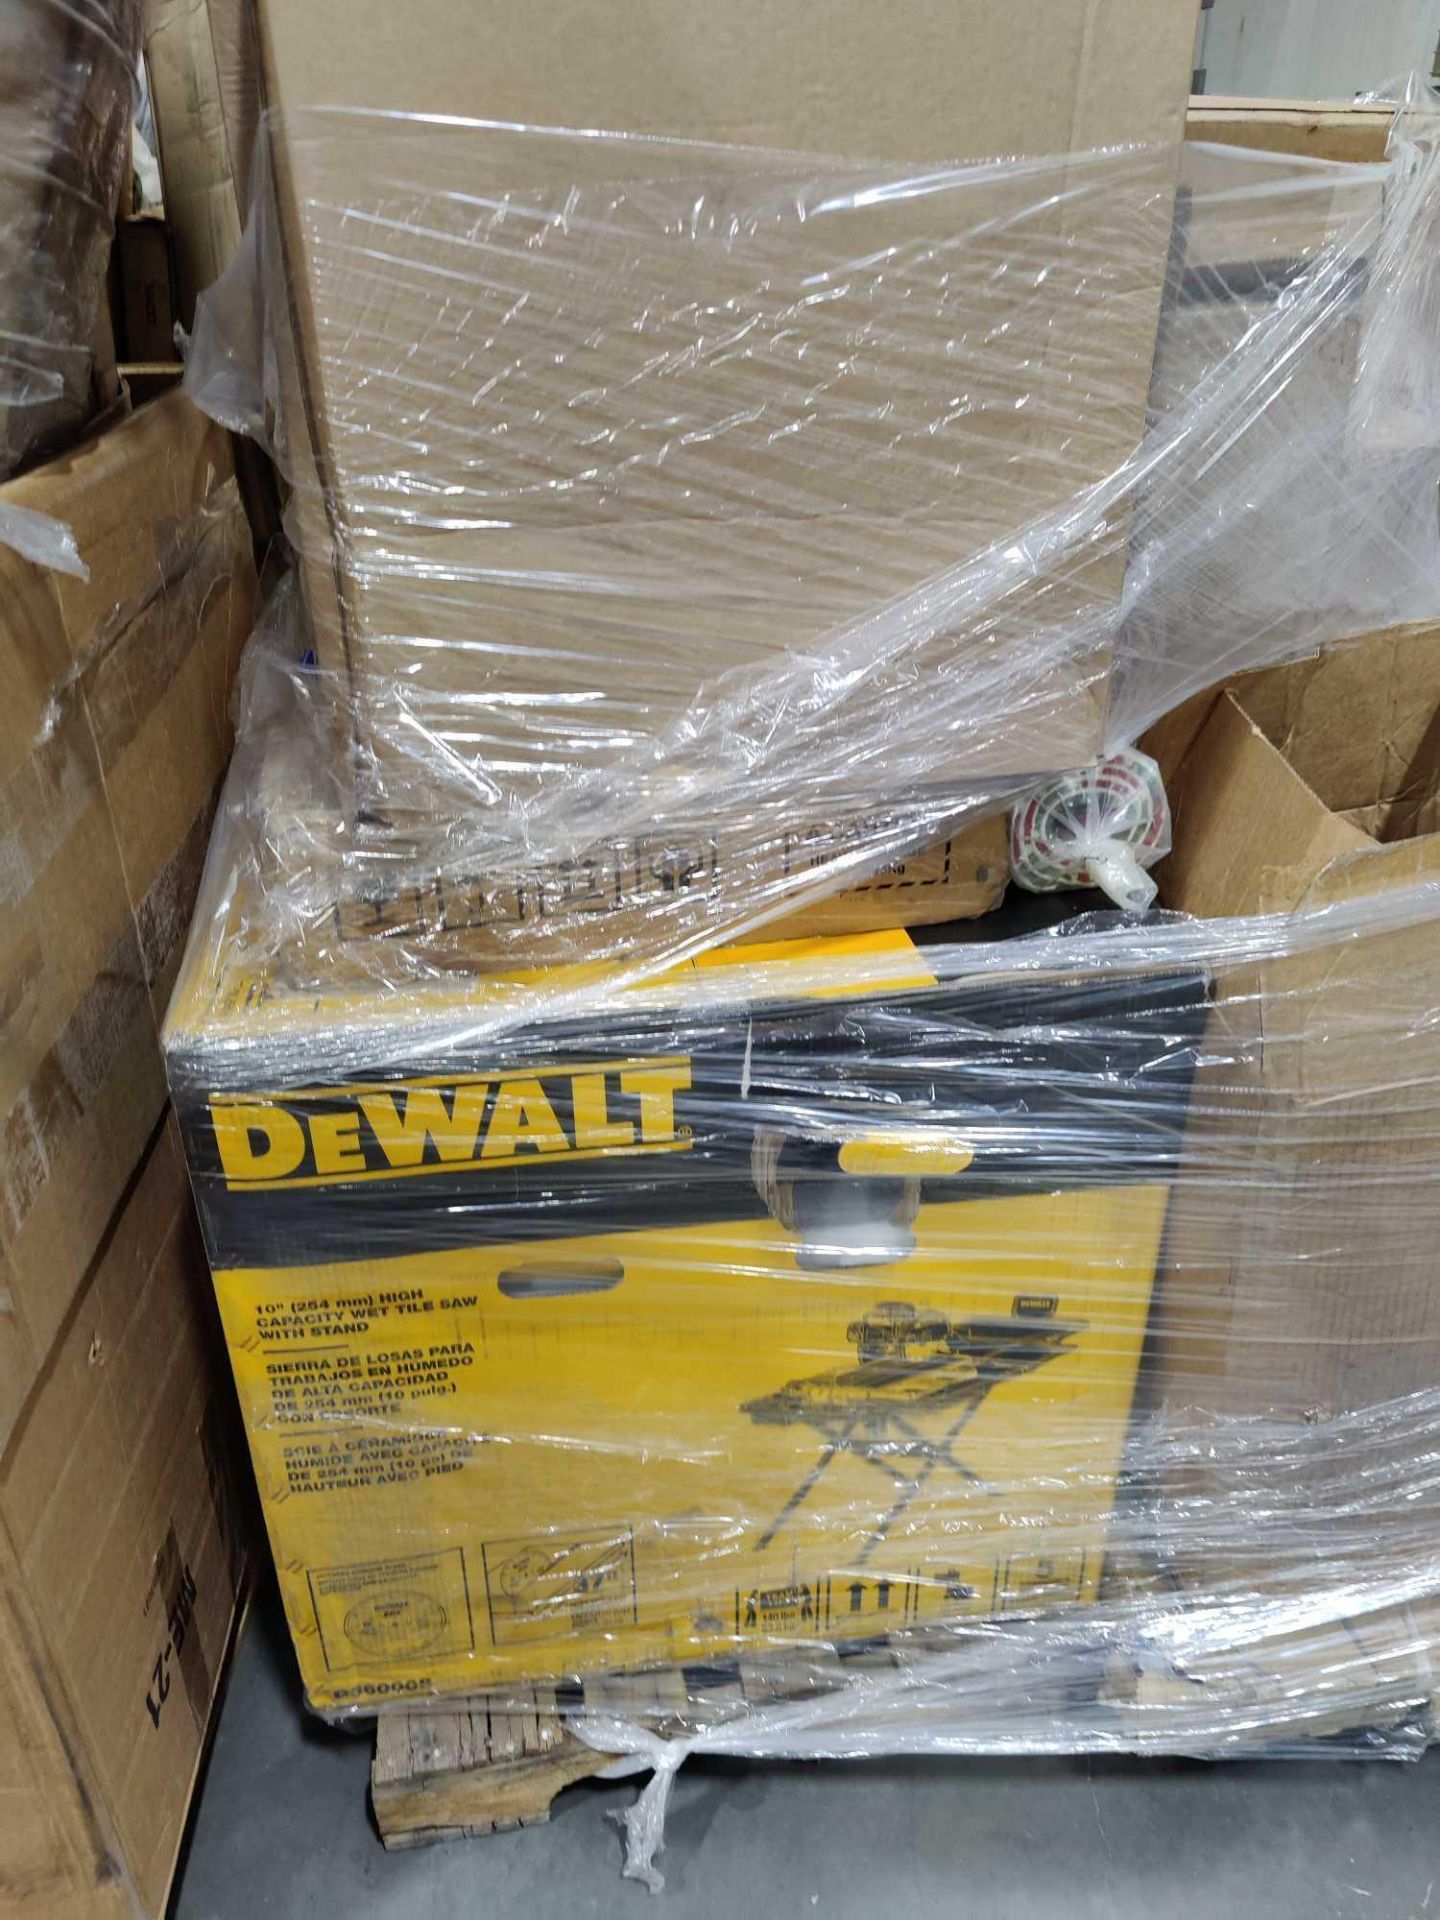 Dewalt High Capacity Wet Tile saw with stand - Image 15 of 28